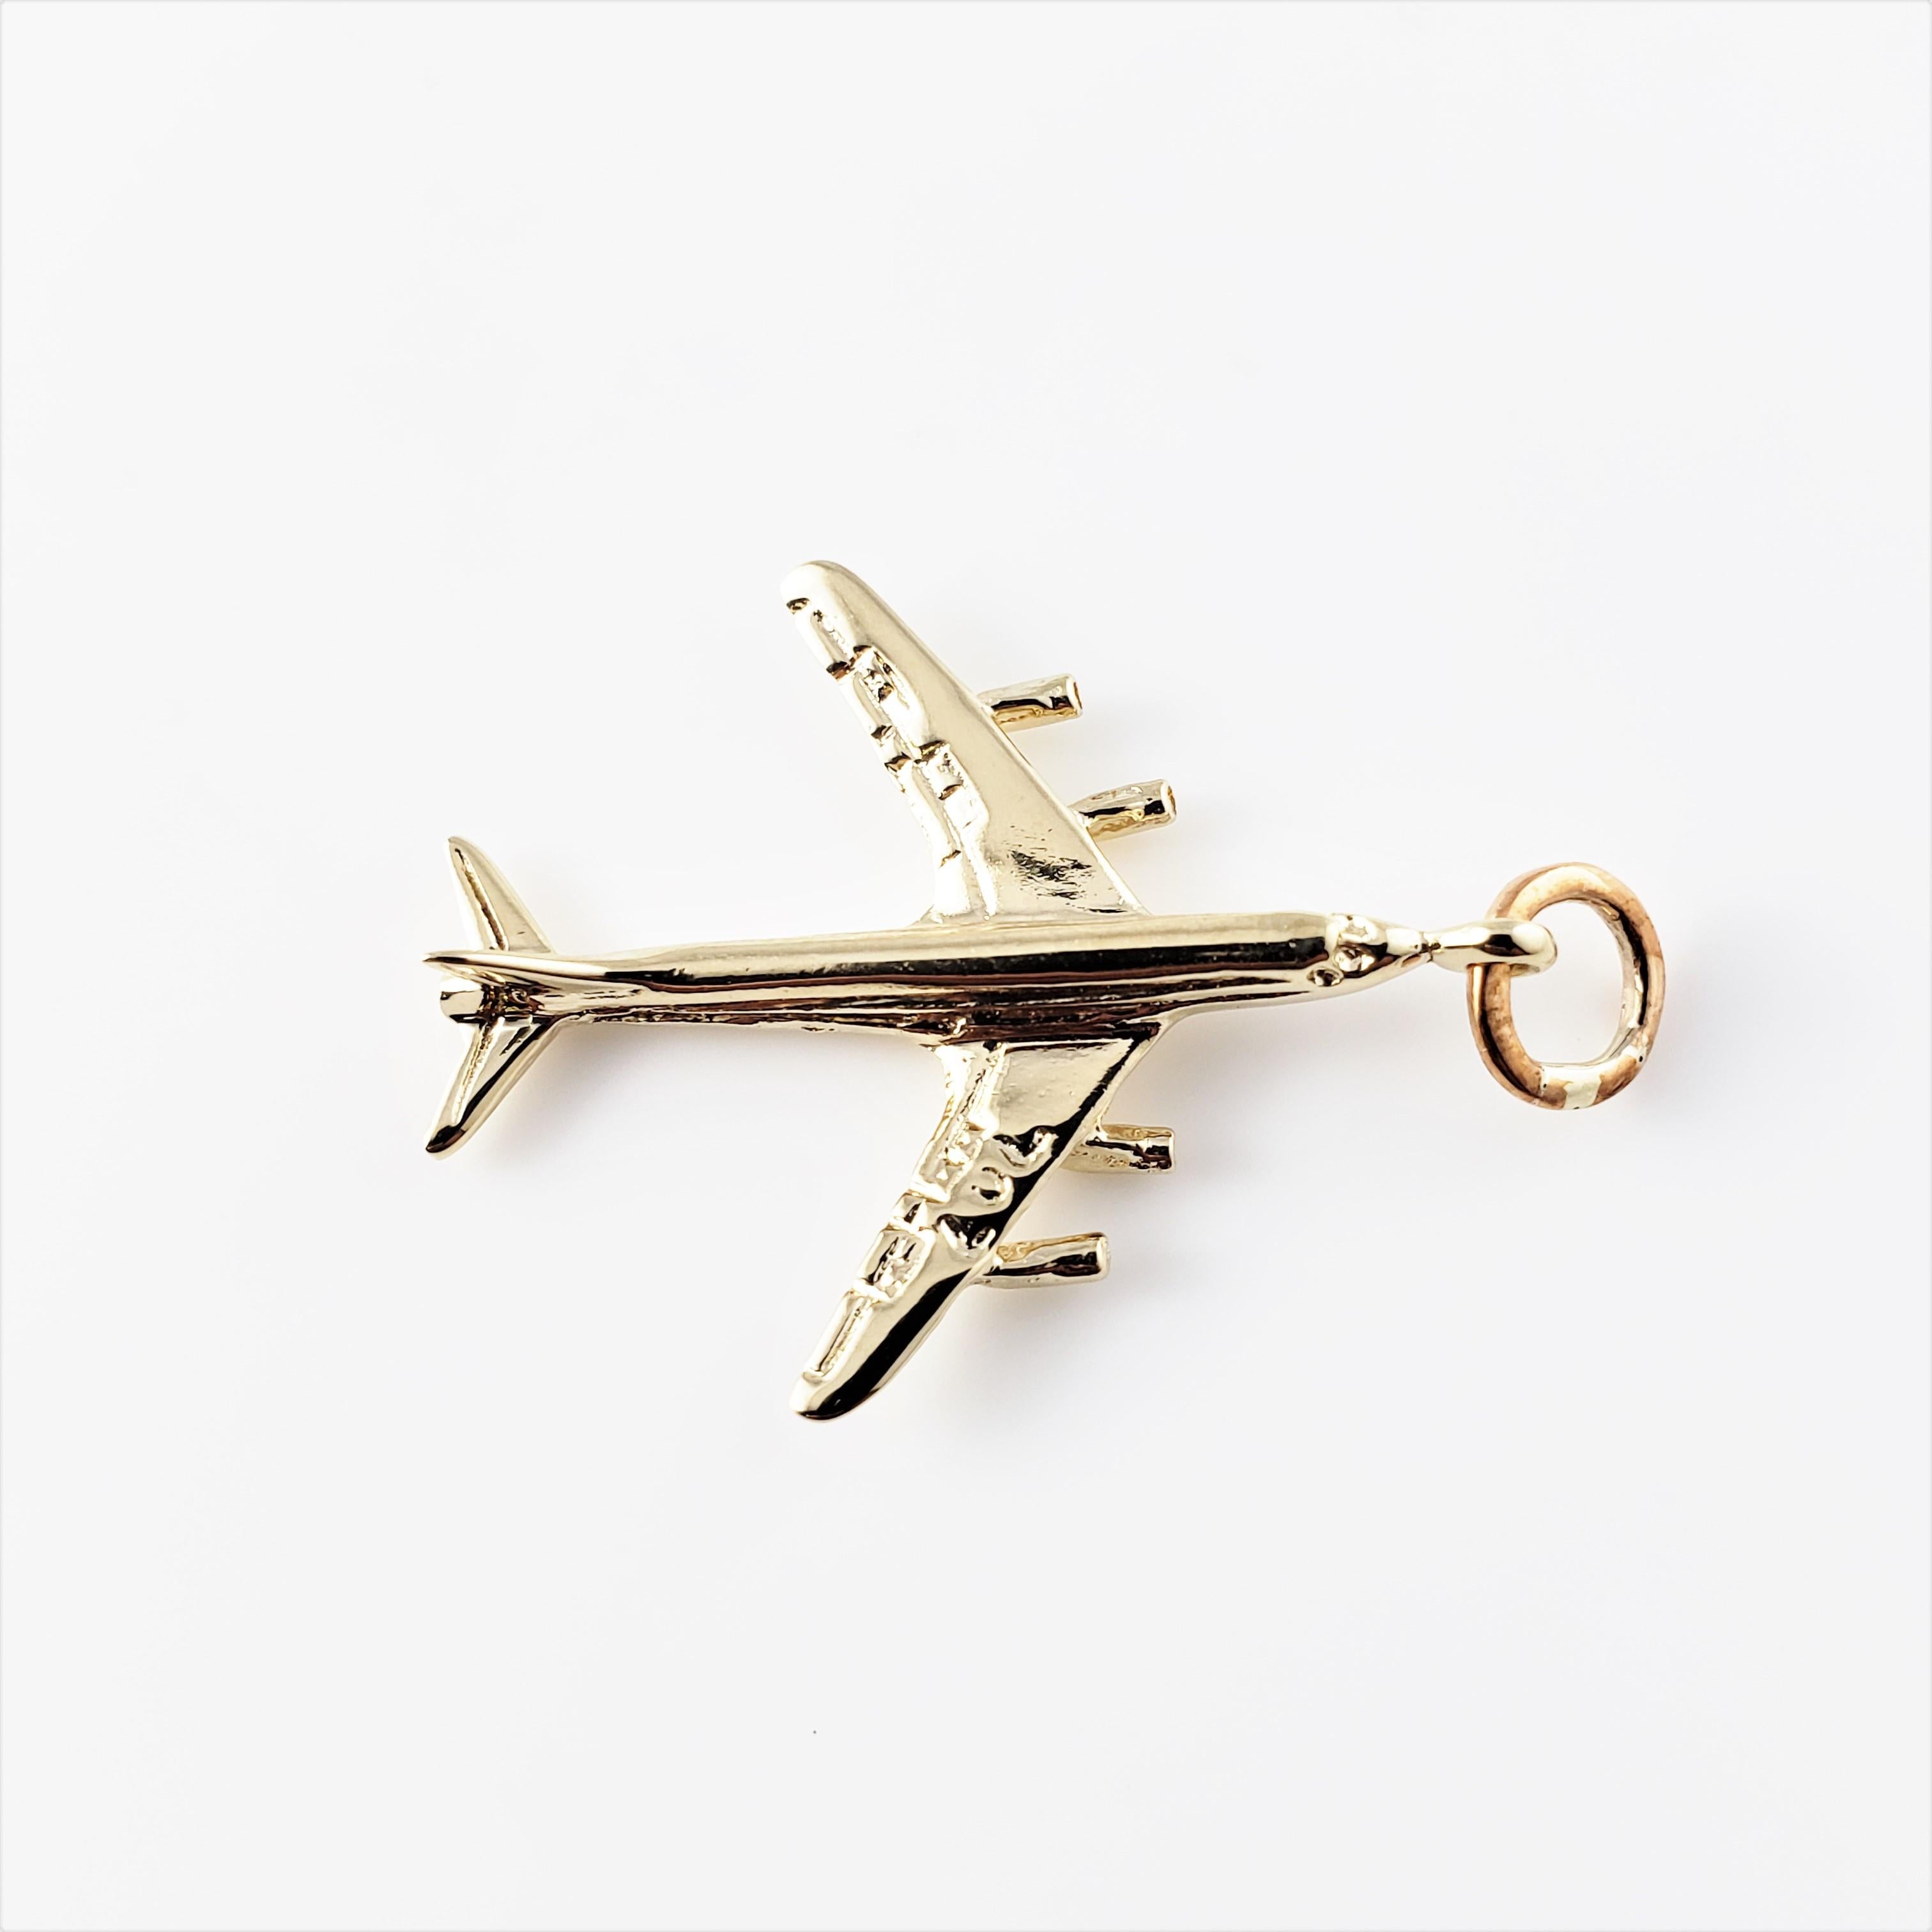 Vintage 14 Karat Yellow Gold 707 Airplane Charm-

Perfect addition to your travel charm collection!

This lovely 3D charm features a miniature airplane meticulously detailed in 14K yellow gold. 707 is engraved on wing.

Size: 27 mm x 22 mm (actual